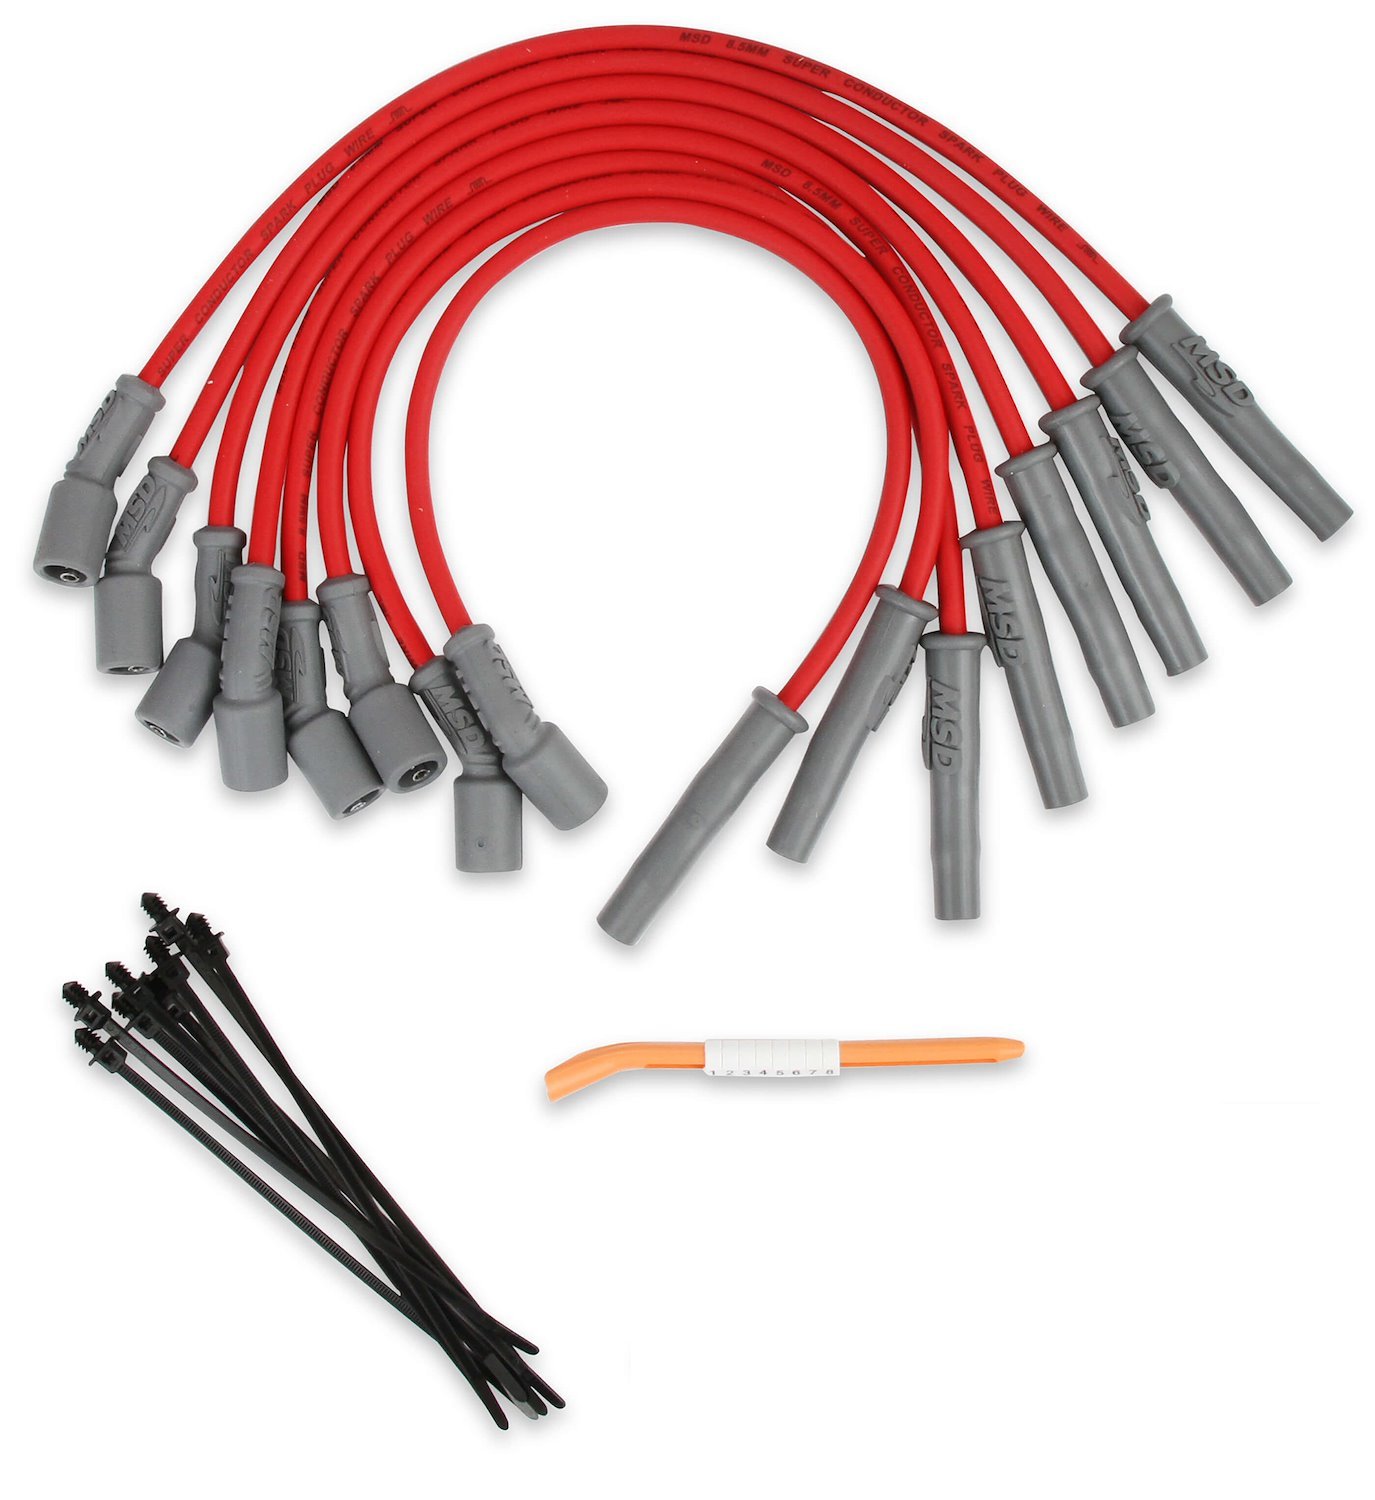 Red Super Conductor 8.5 mm Spark Plug Wires,